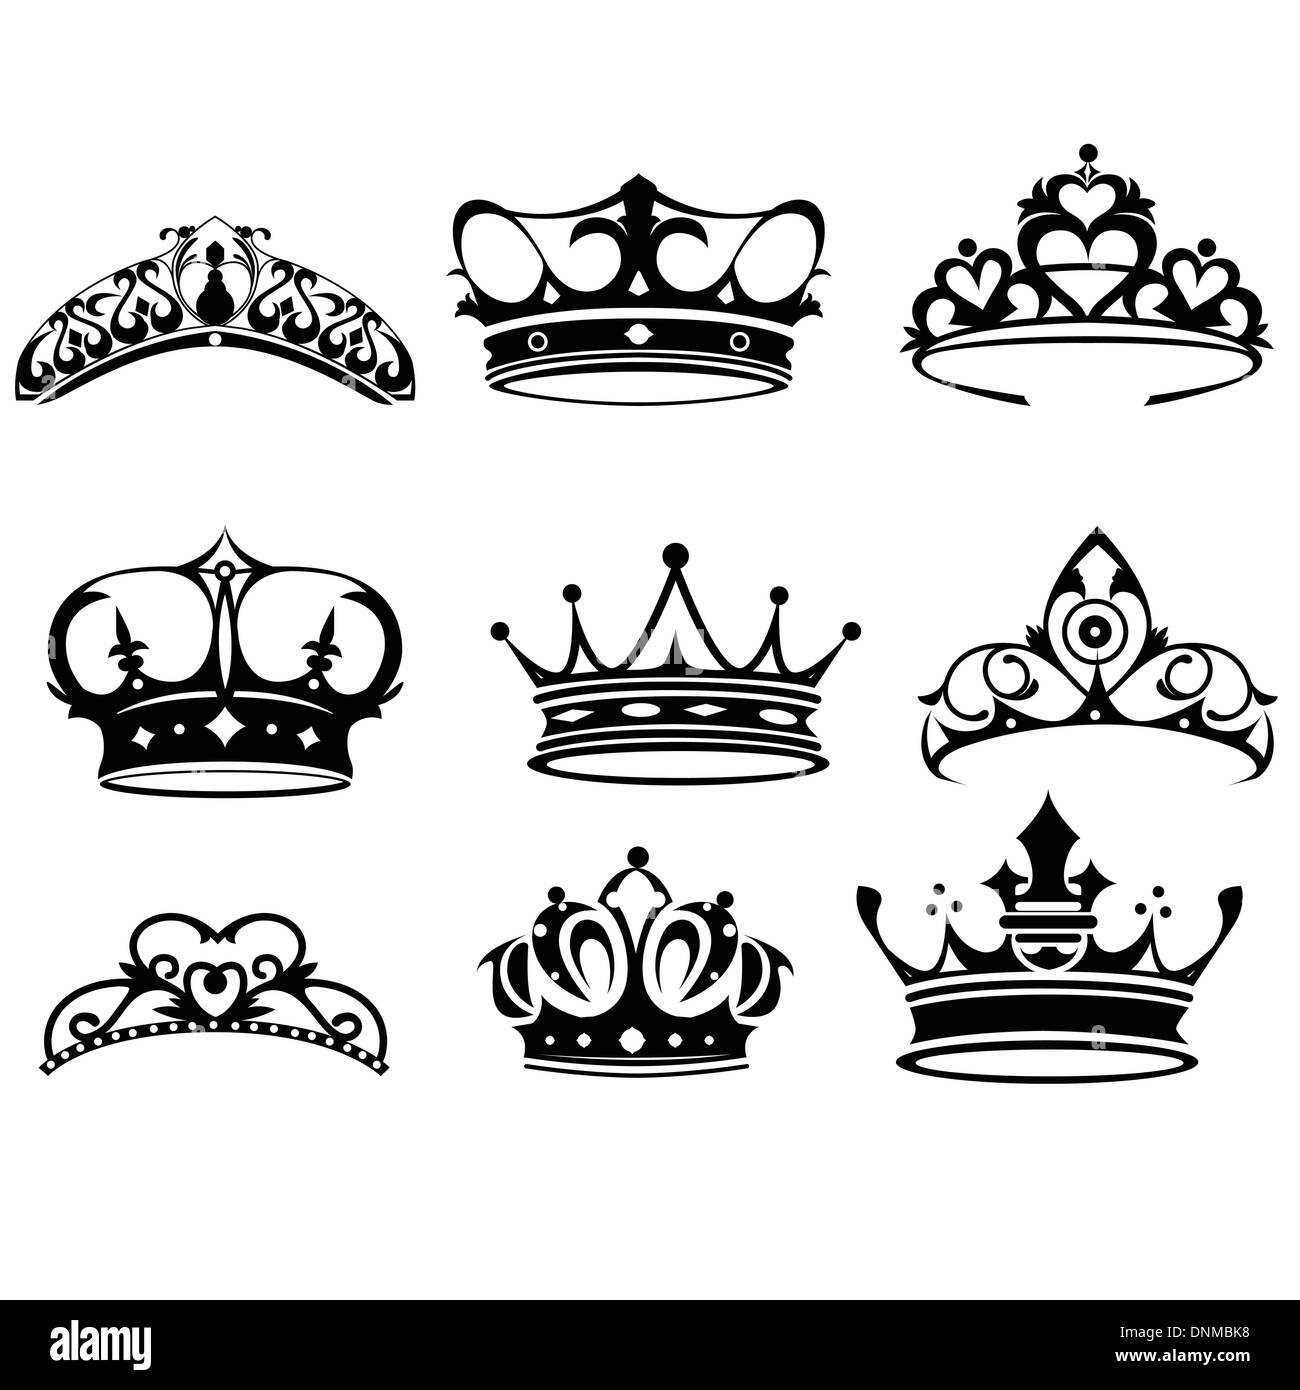 King And Queen Crown Vector Art, Icons, and Graphics for Free Download